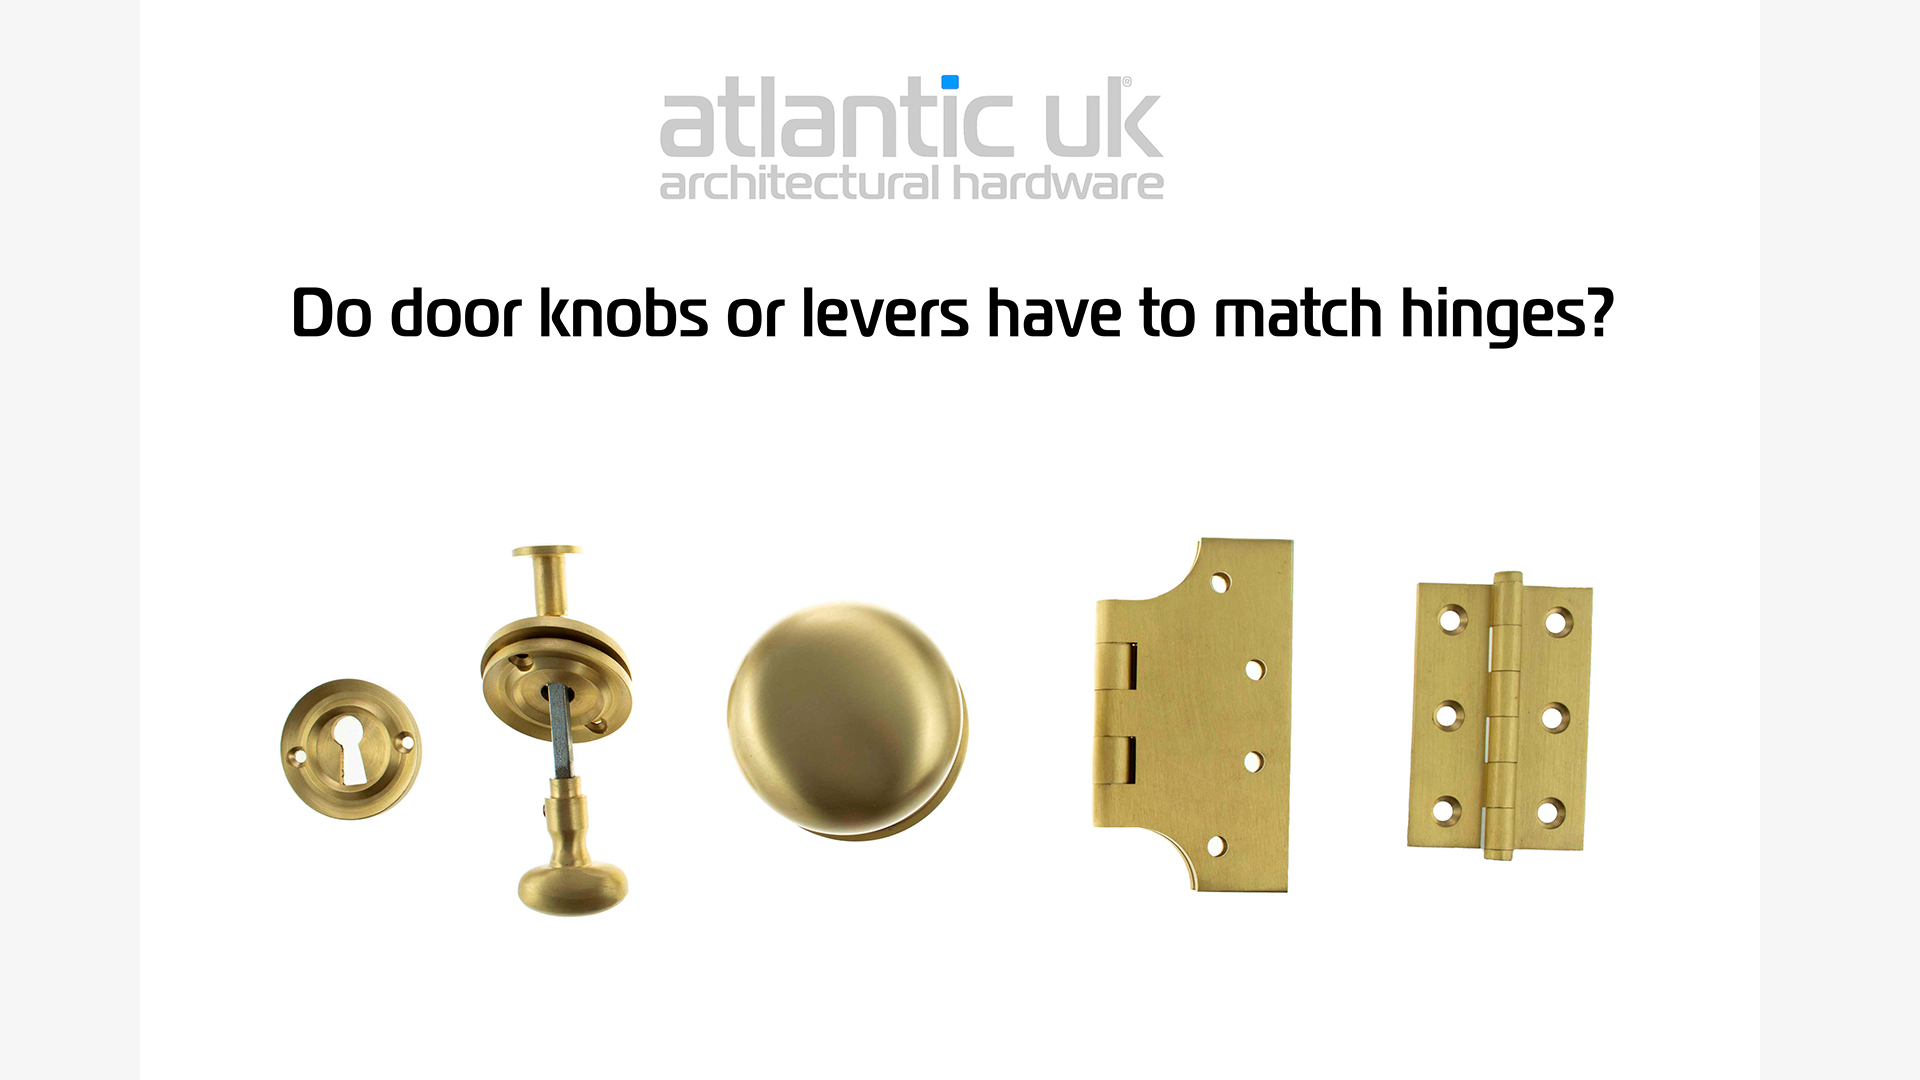 Do door knobs or levers have to match hinges?